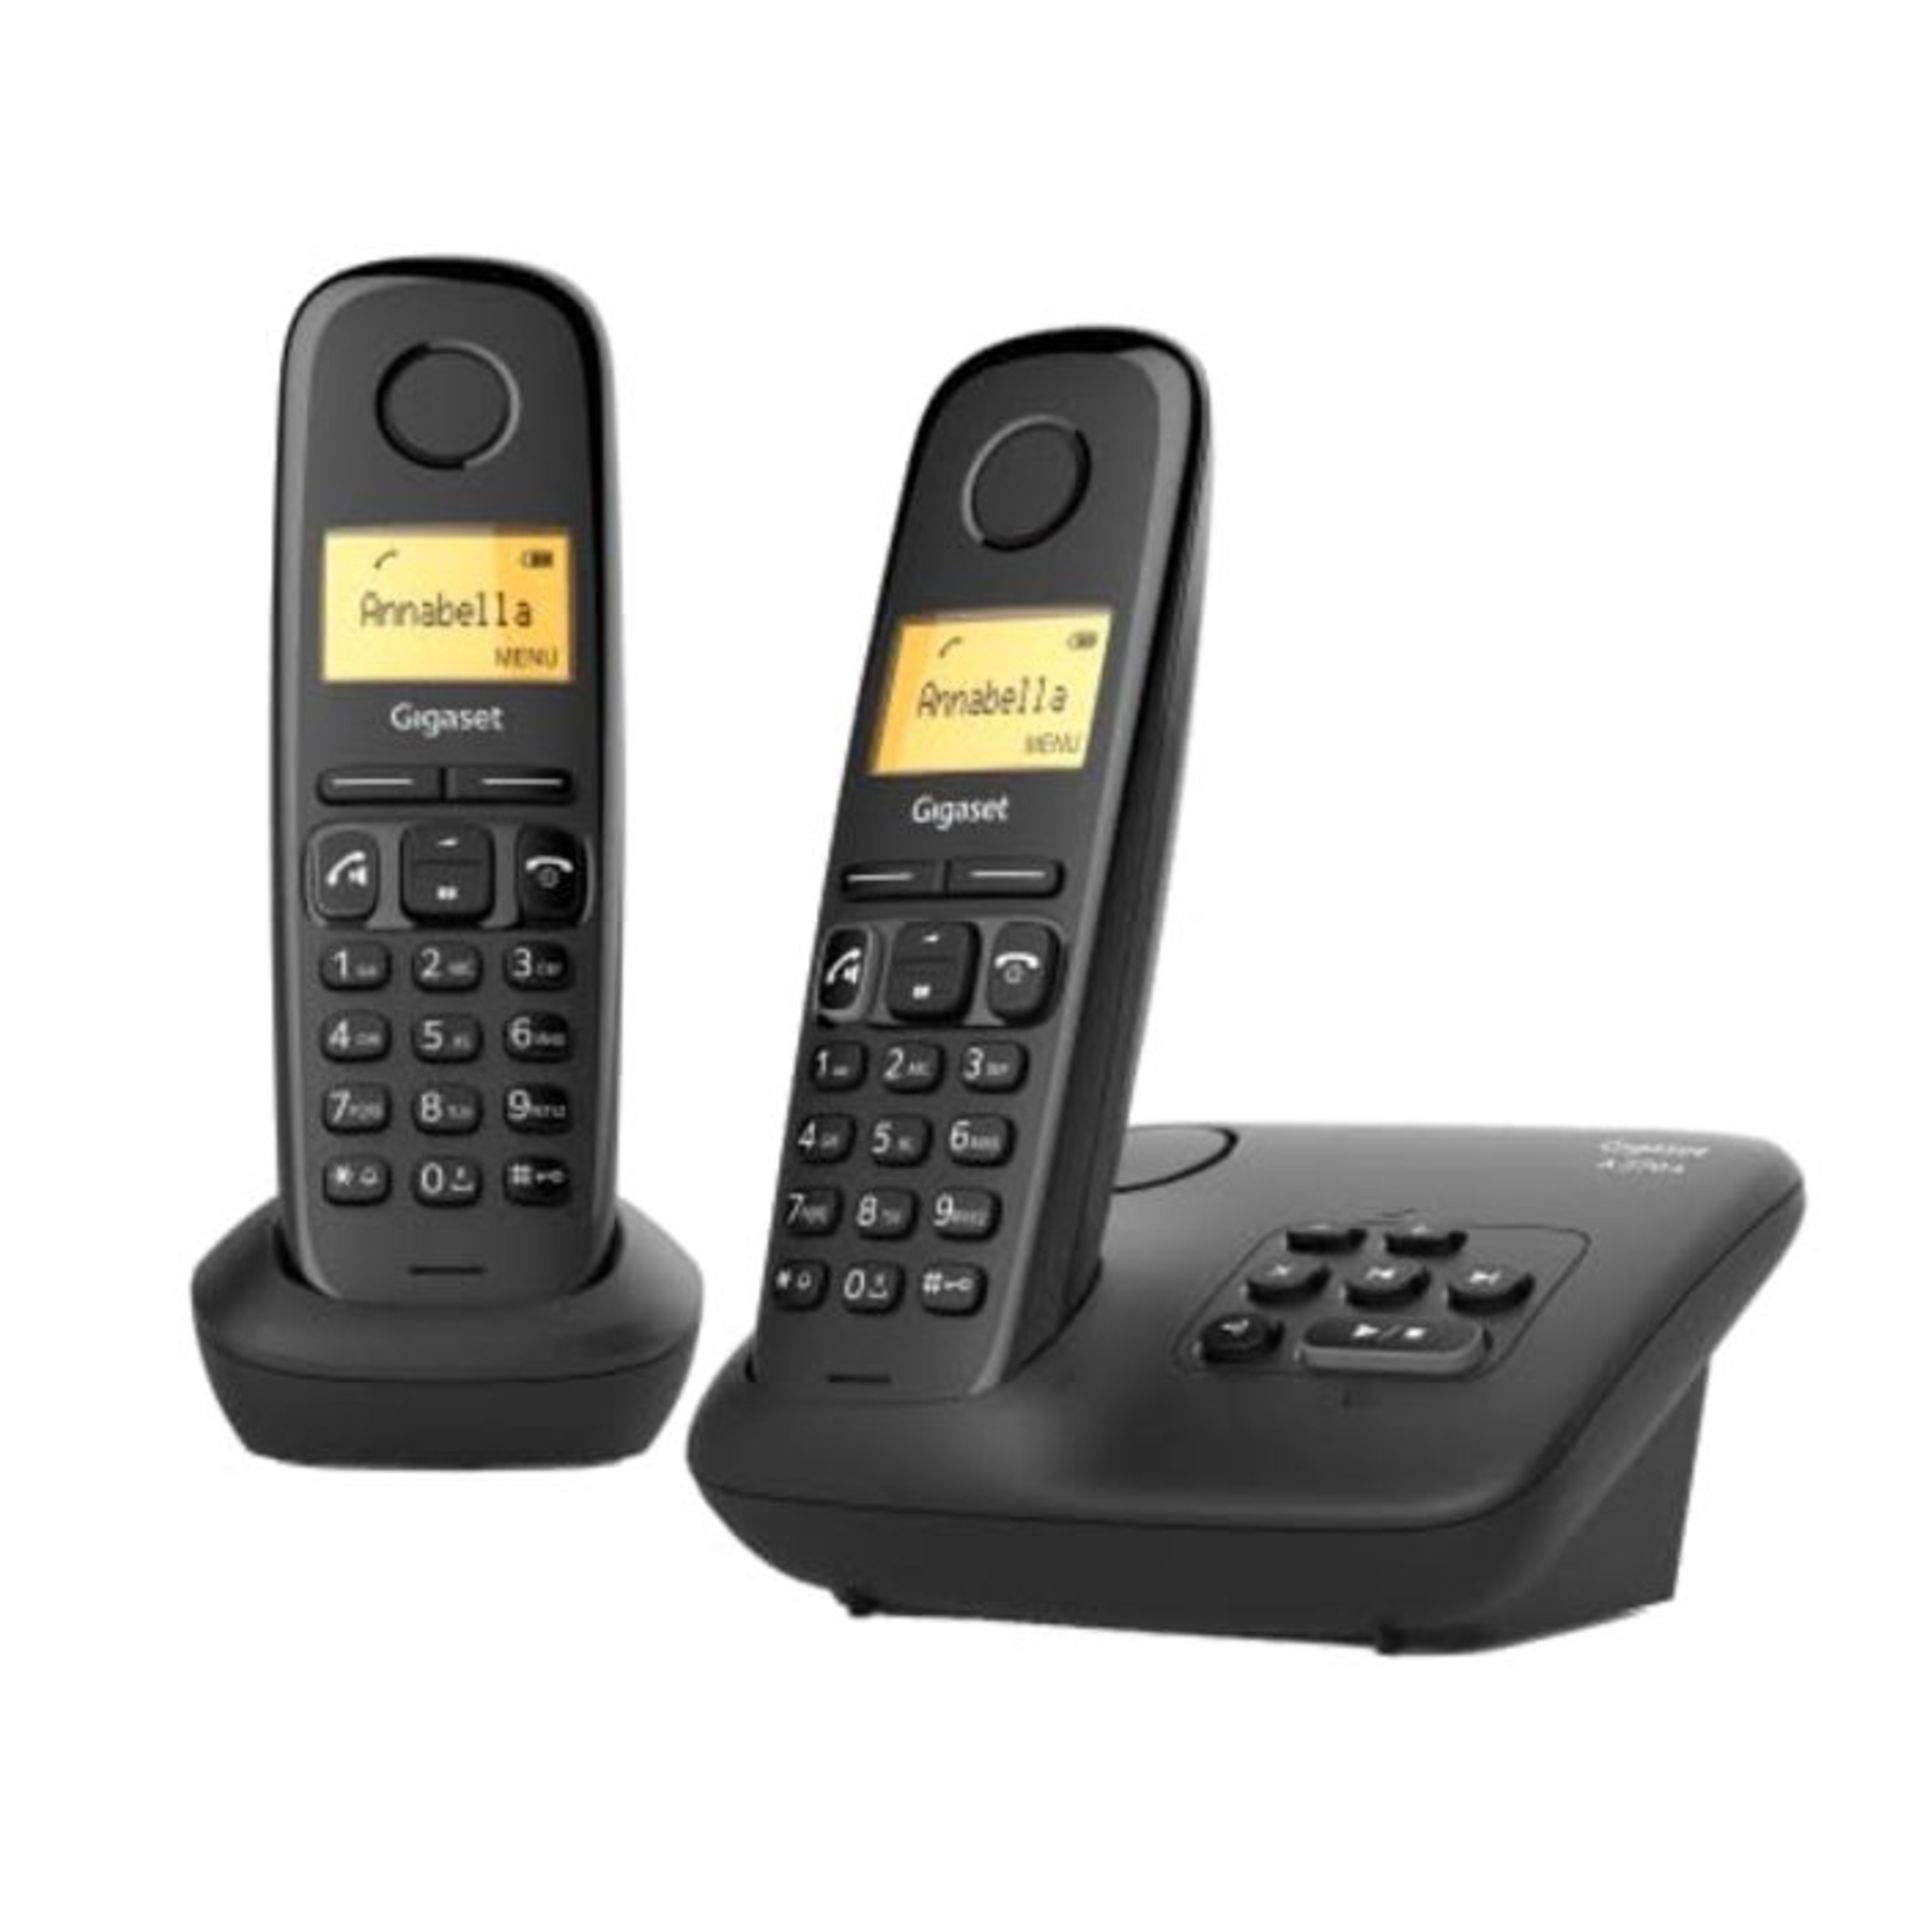 Gigaset A270A DUO - Basic Cordless Home Phone with Big Display, Answer Machine and Spe